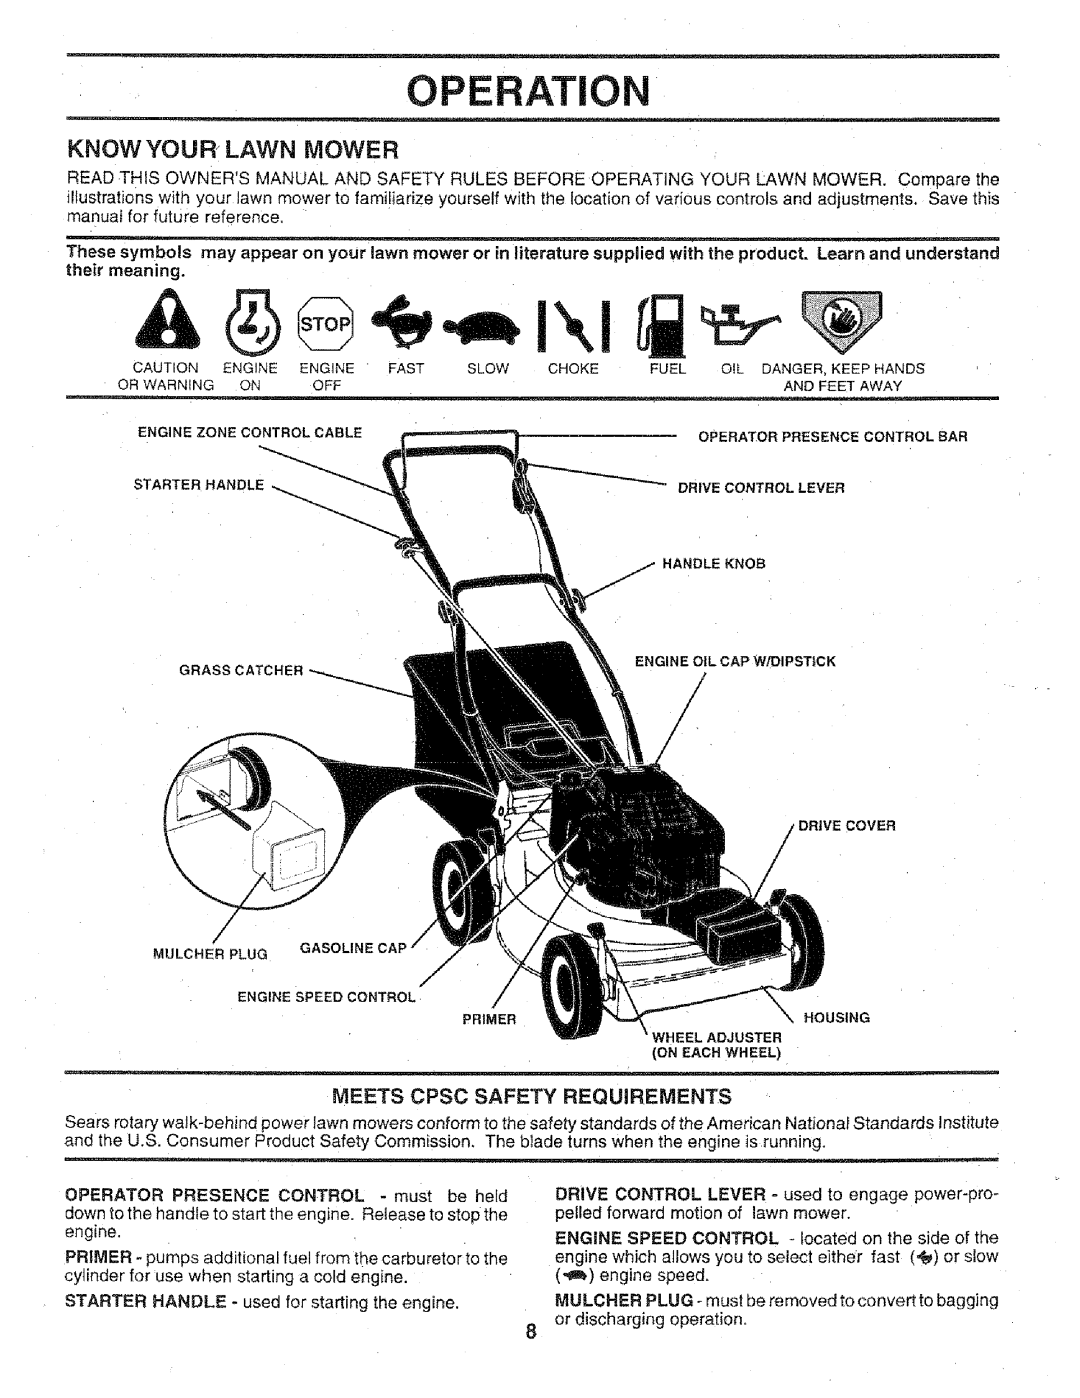 Craftsman 917.3773 manual Operation, Know Your Lawn Mower 